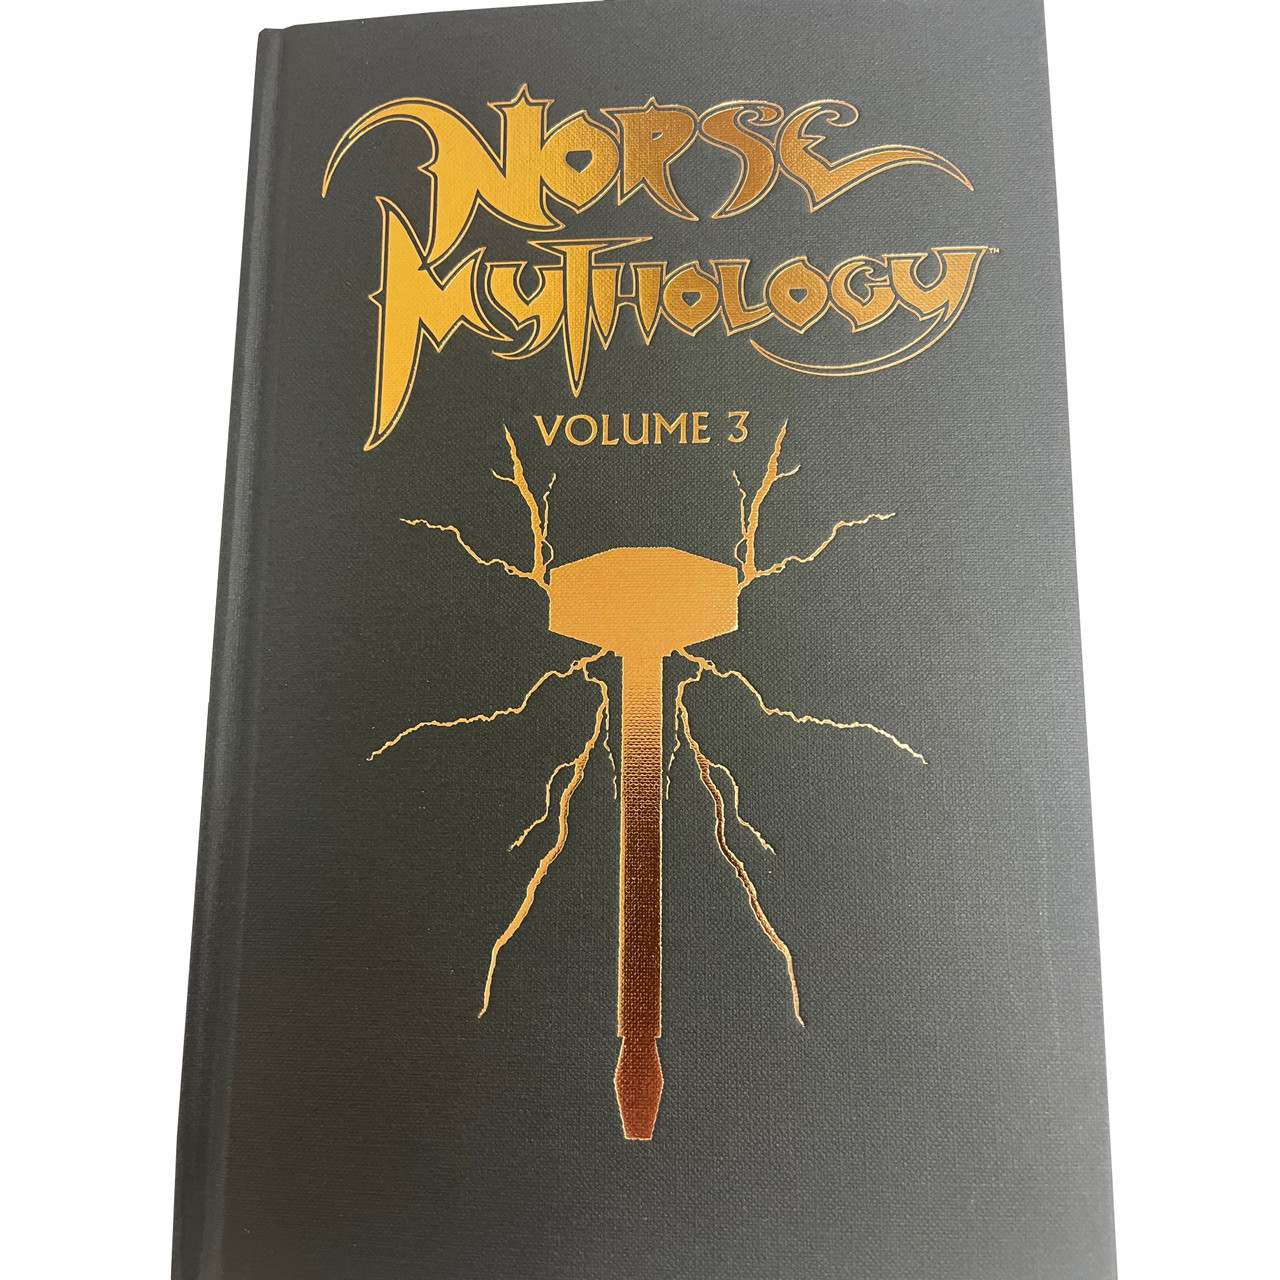 Neil Gaiman "Norse Mythology" Signed First Edition Trilogy, Hardcover Graphic Novels, Volumes 1-3 w/COA [Very Fine]